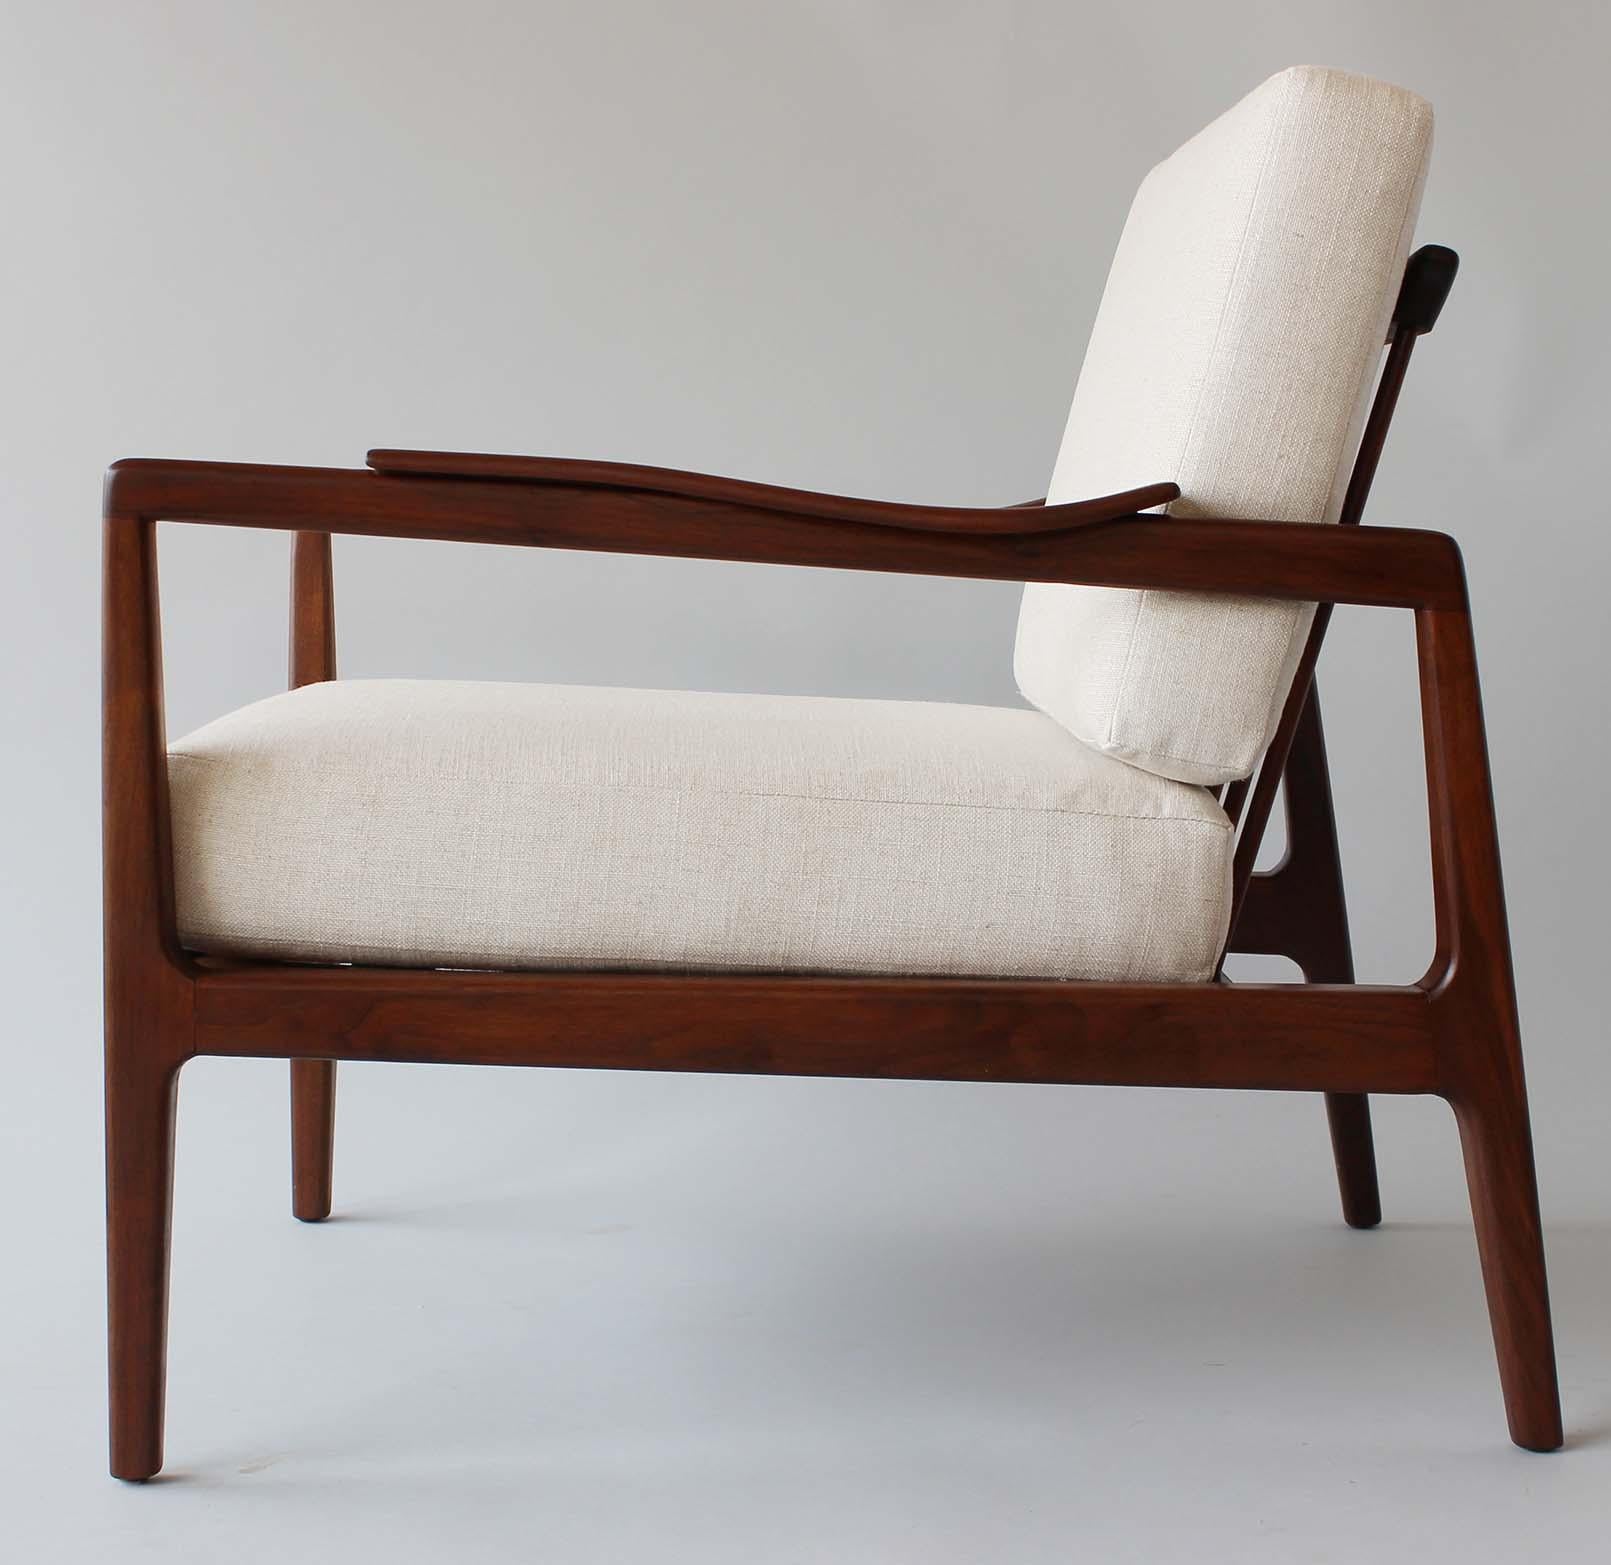 A pair of walnut frame armchairs with new cushions, designed by Edmond Spence for Modernage.

